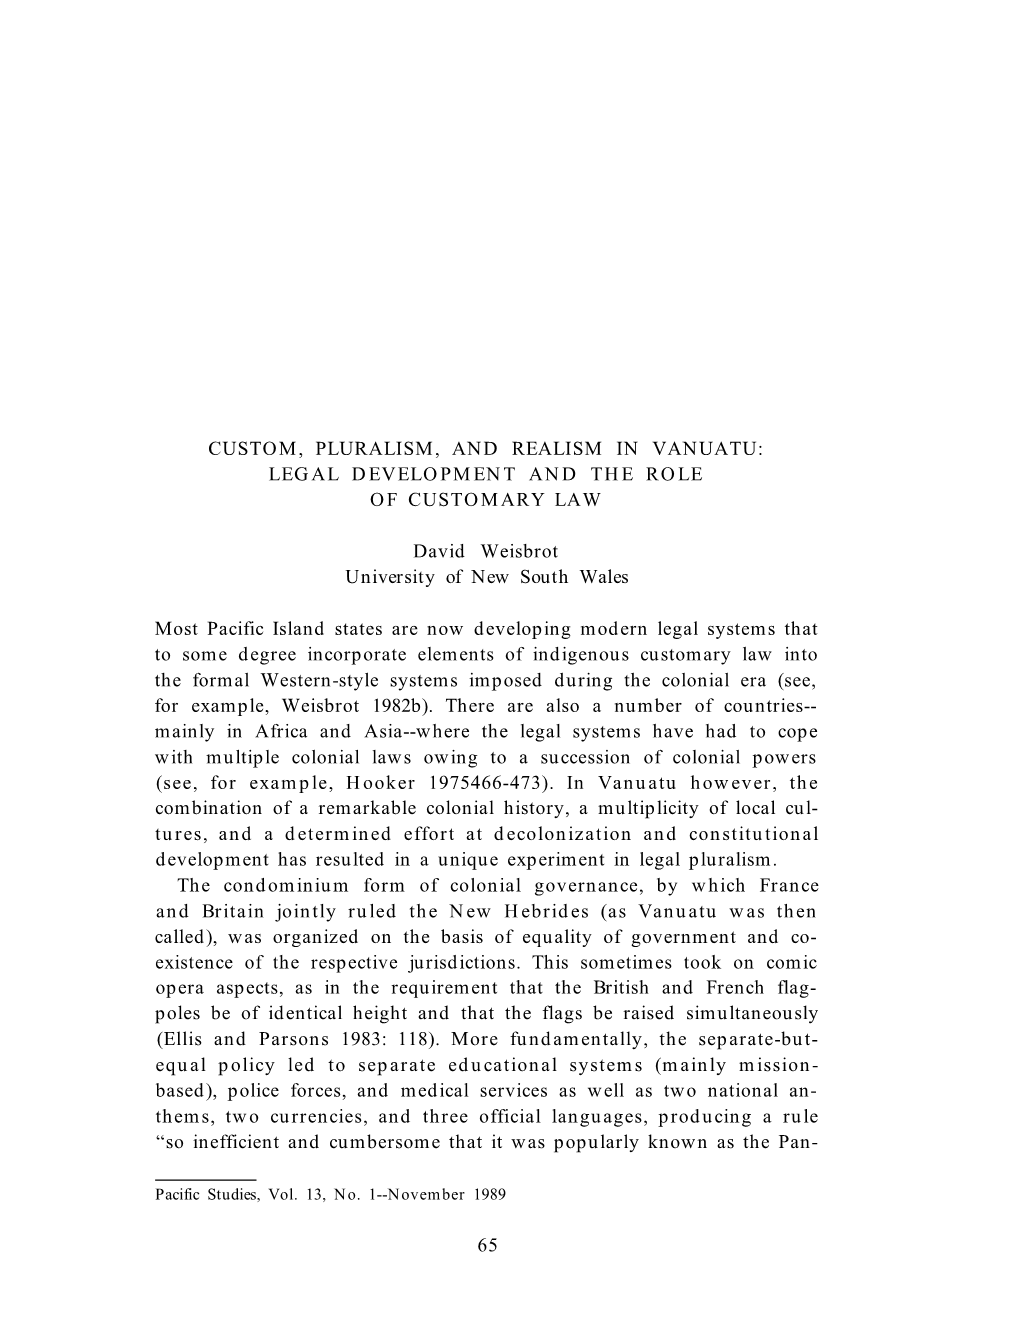 Custom, Pluralism, and Realism in Vanuatu: Legal Development and the Role of Customary Law